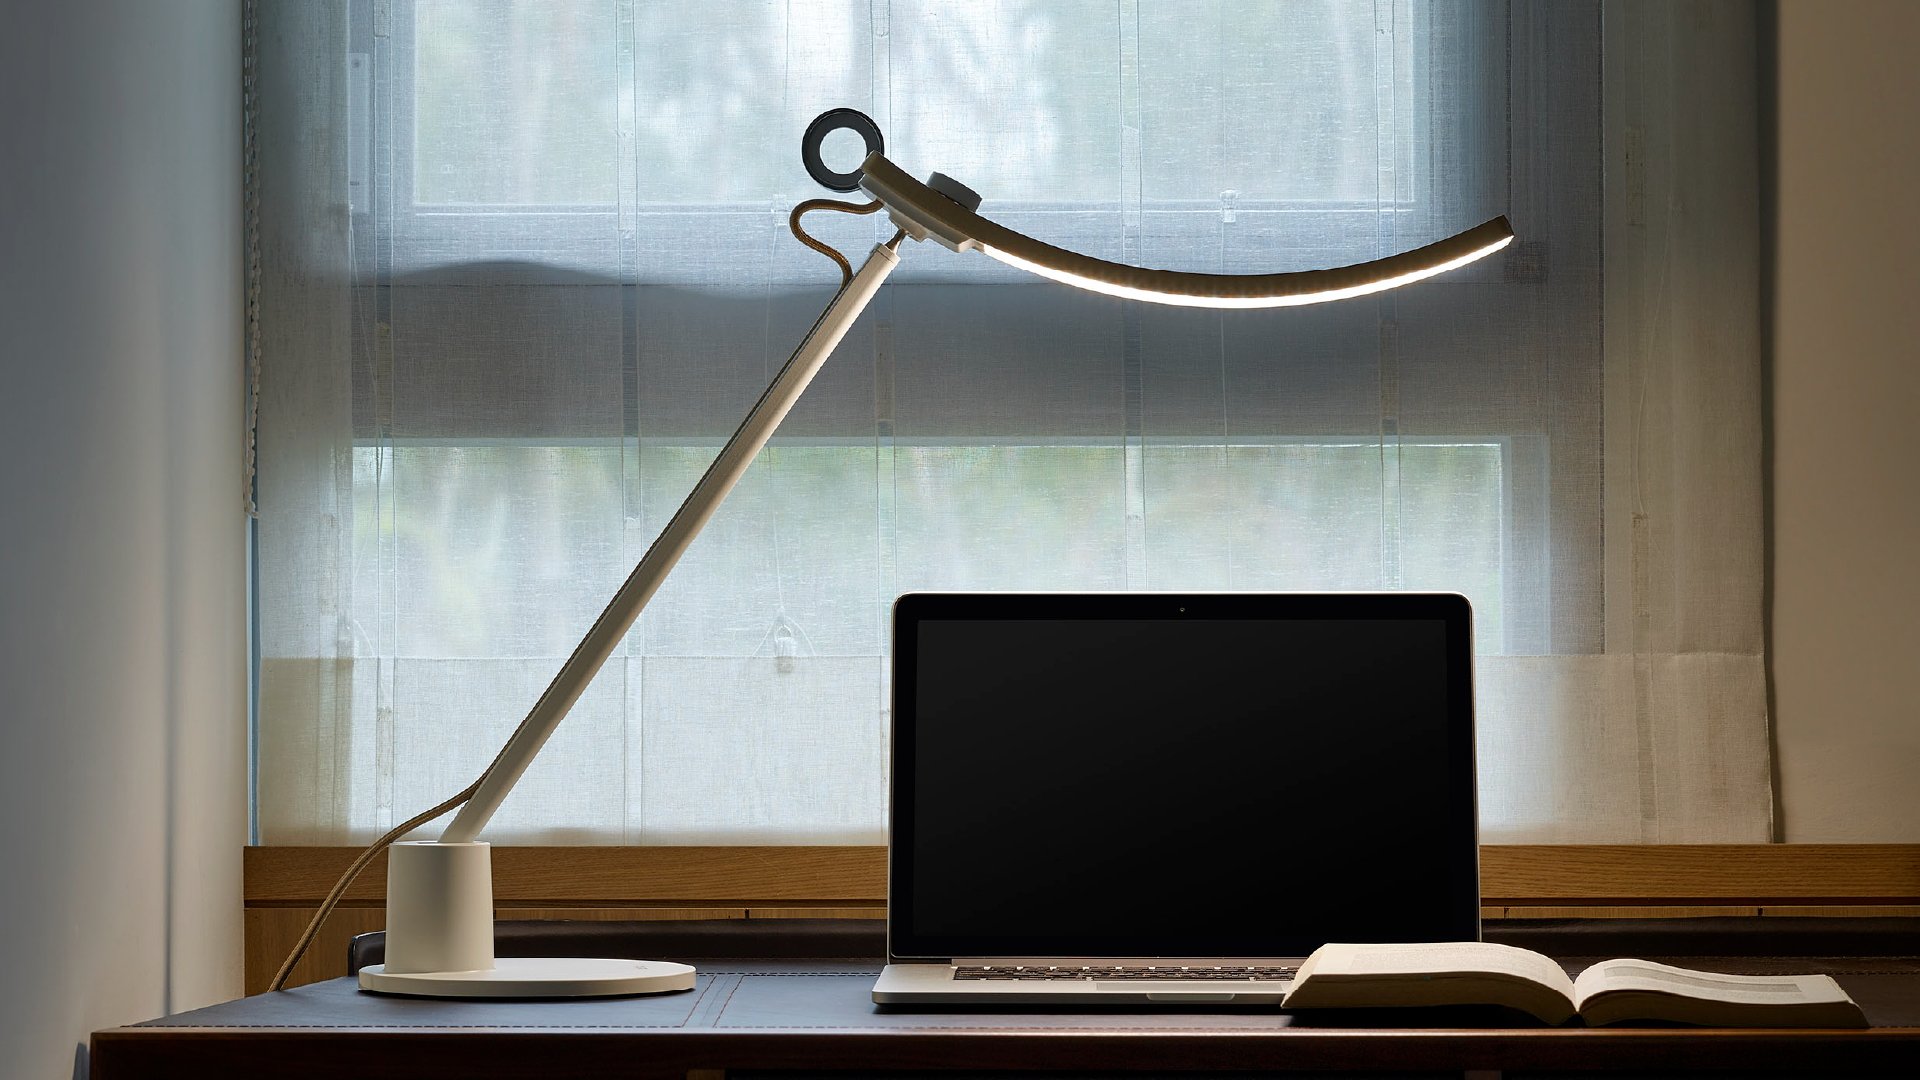 Adequate lighting provides the perfect amount of light for any laptop workstation.